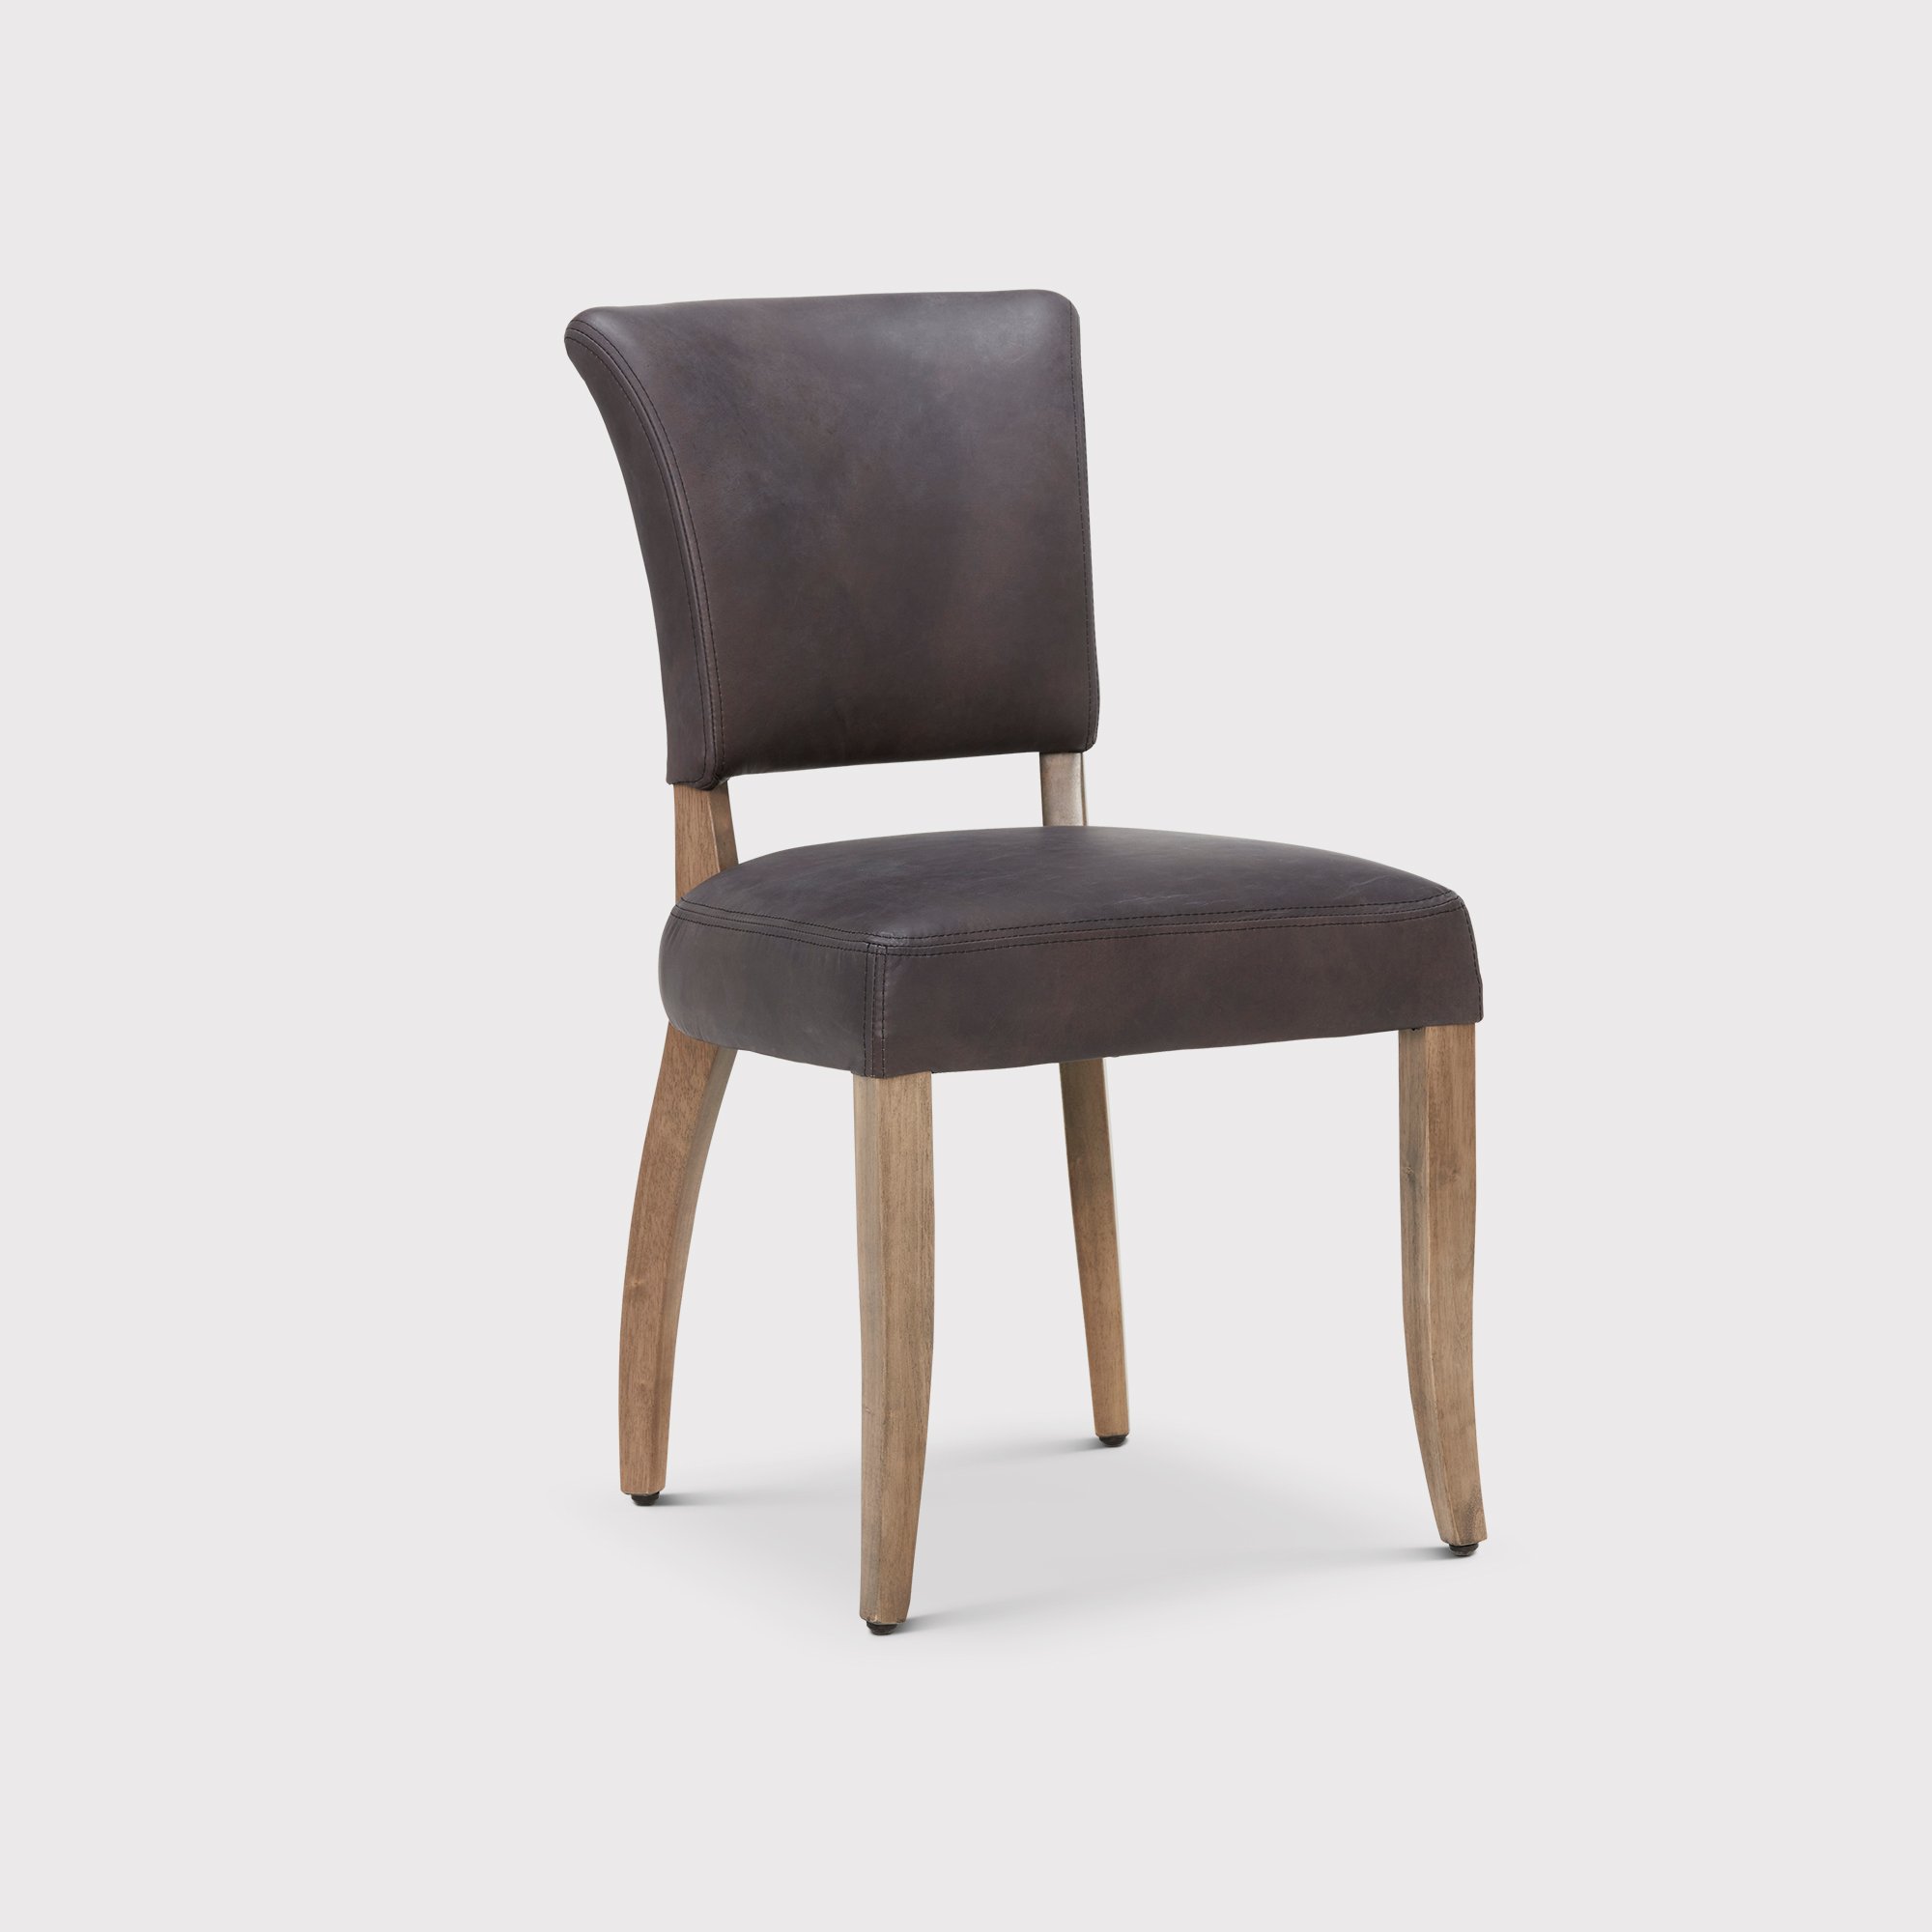 Timothy Oulton Mimi Dining Chair, Black Leather | Barker & Stonehouse